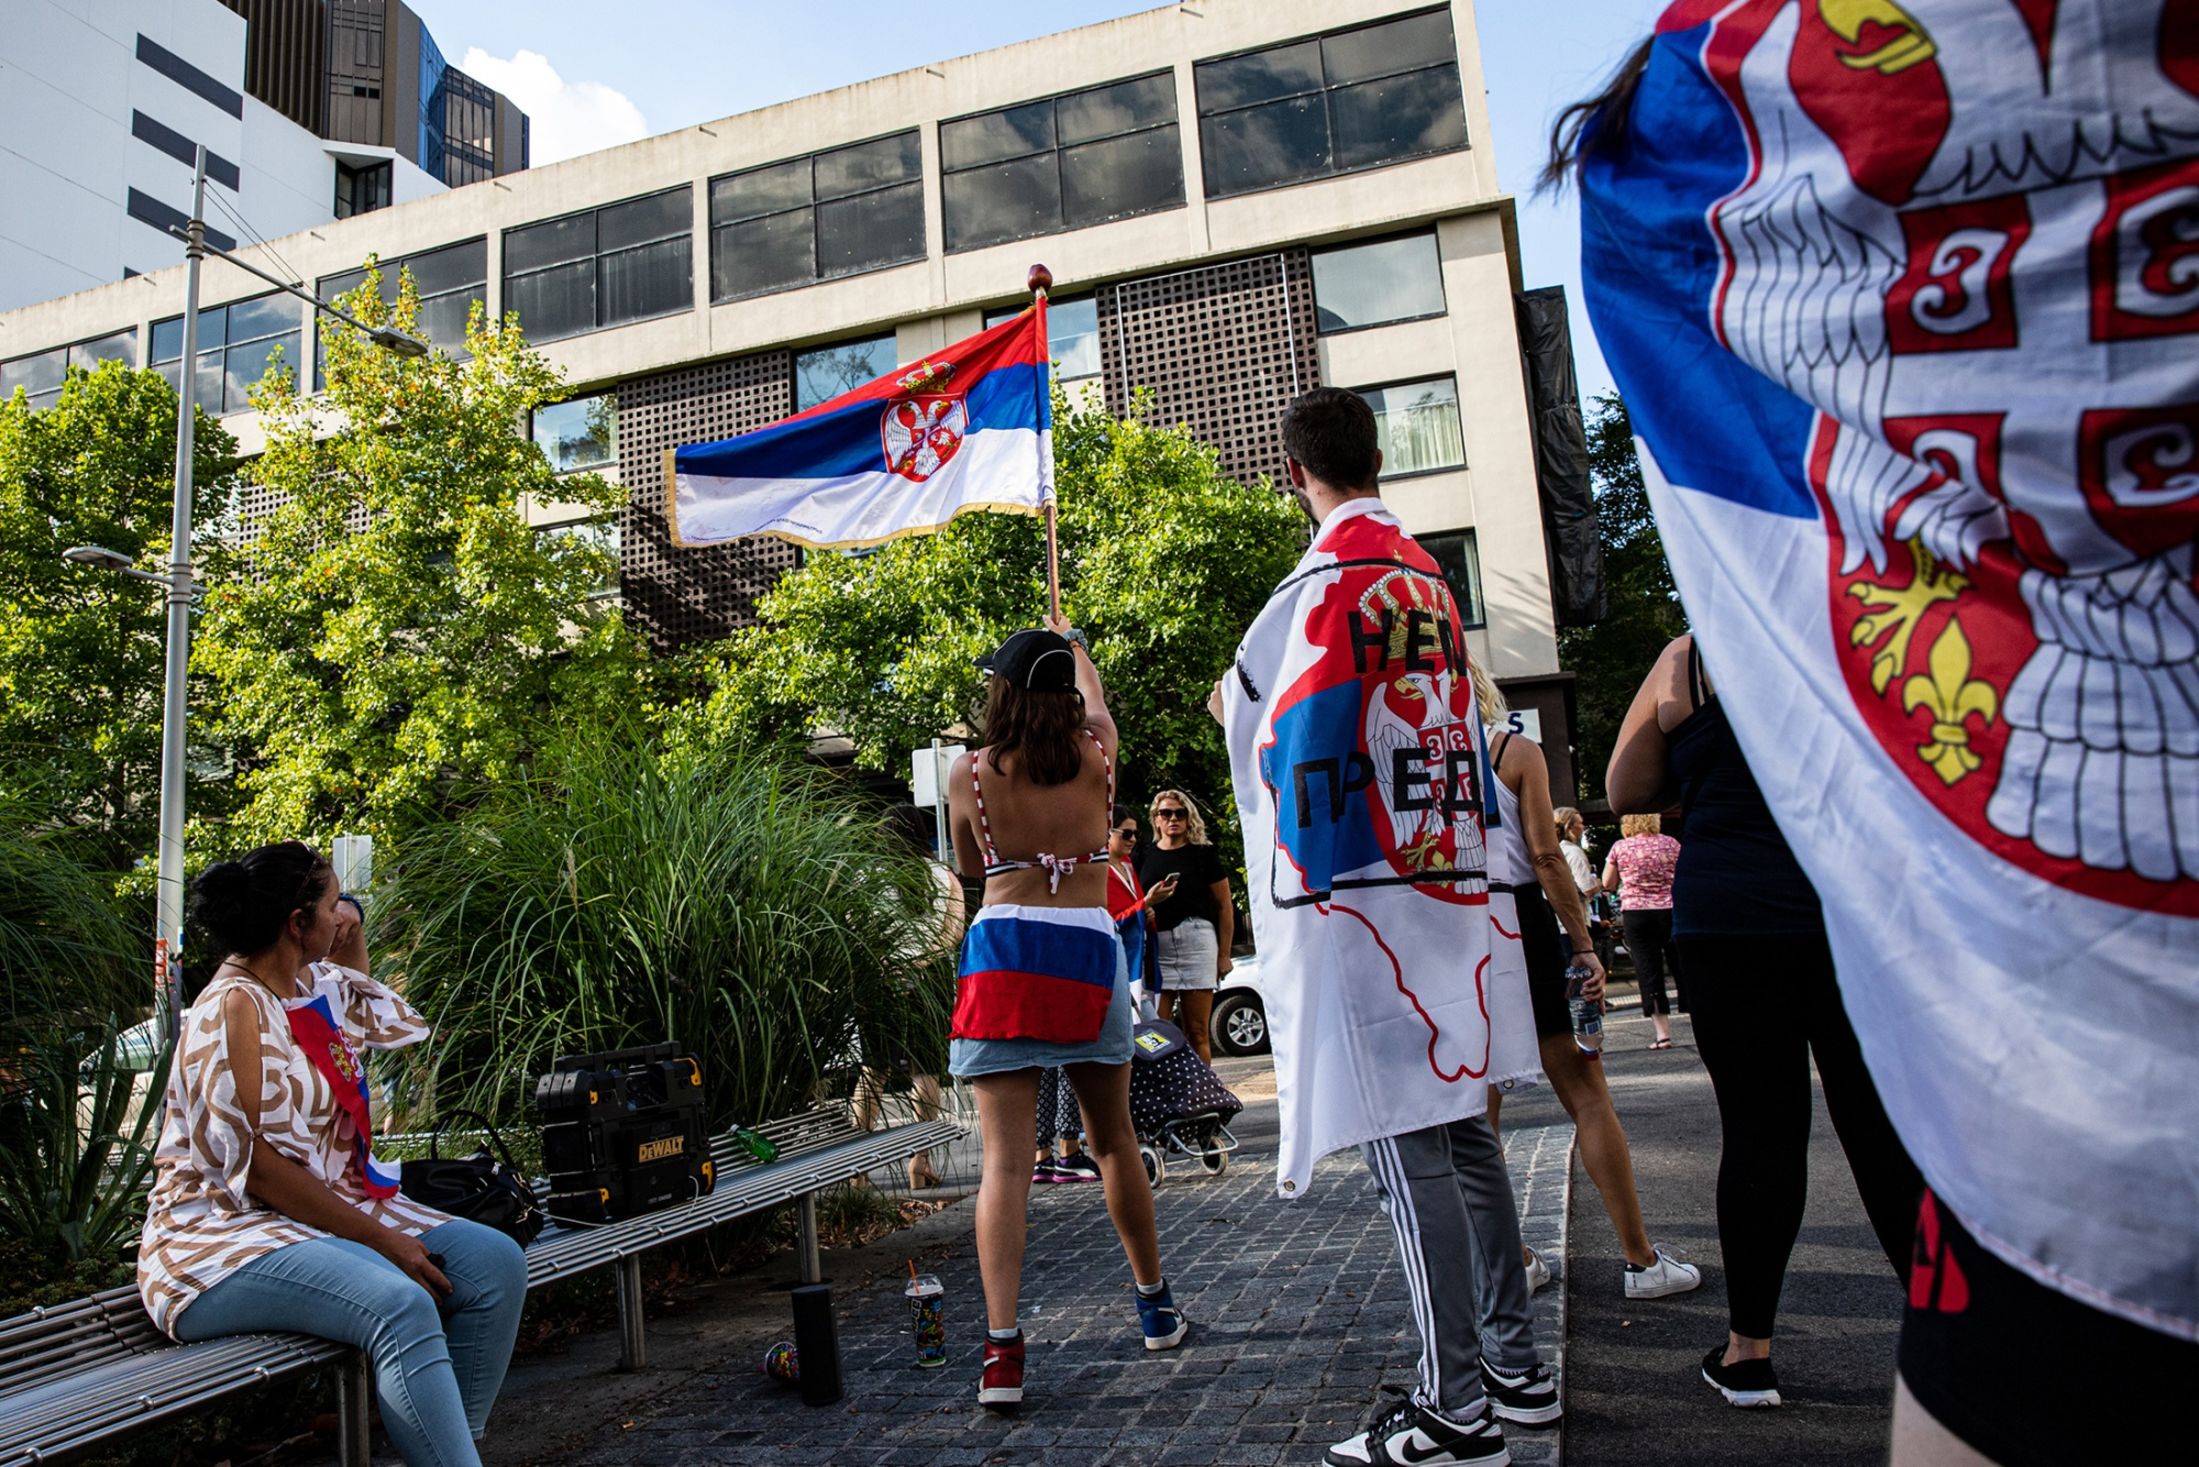 Supporters gather outside the Park Hotel where Novak Djokovic was taken pending his removal from the country after his visa was cancelled by the Australian Border Force on Jan. 6, 2022 in Melbourne, Australia. (Diego Fedele/Getty Images)